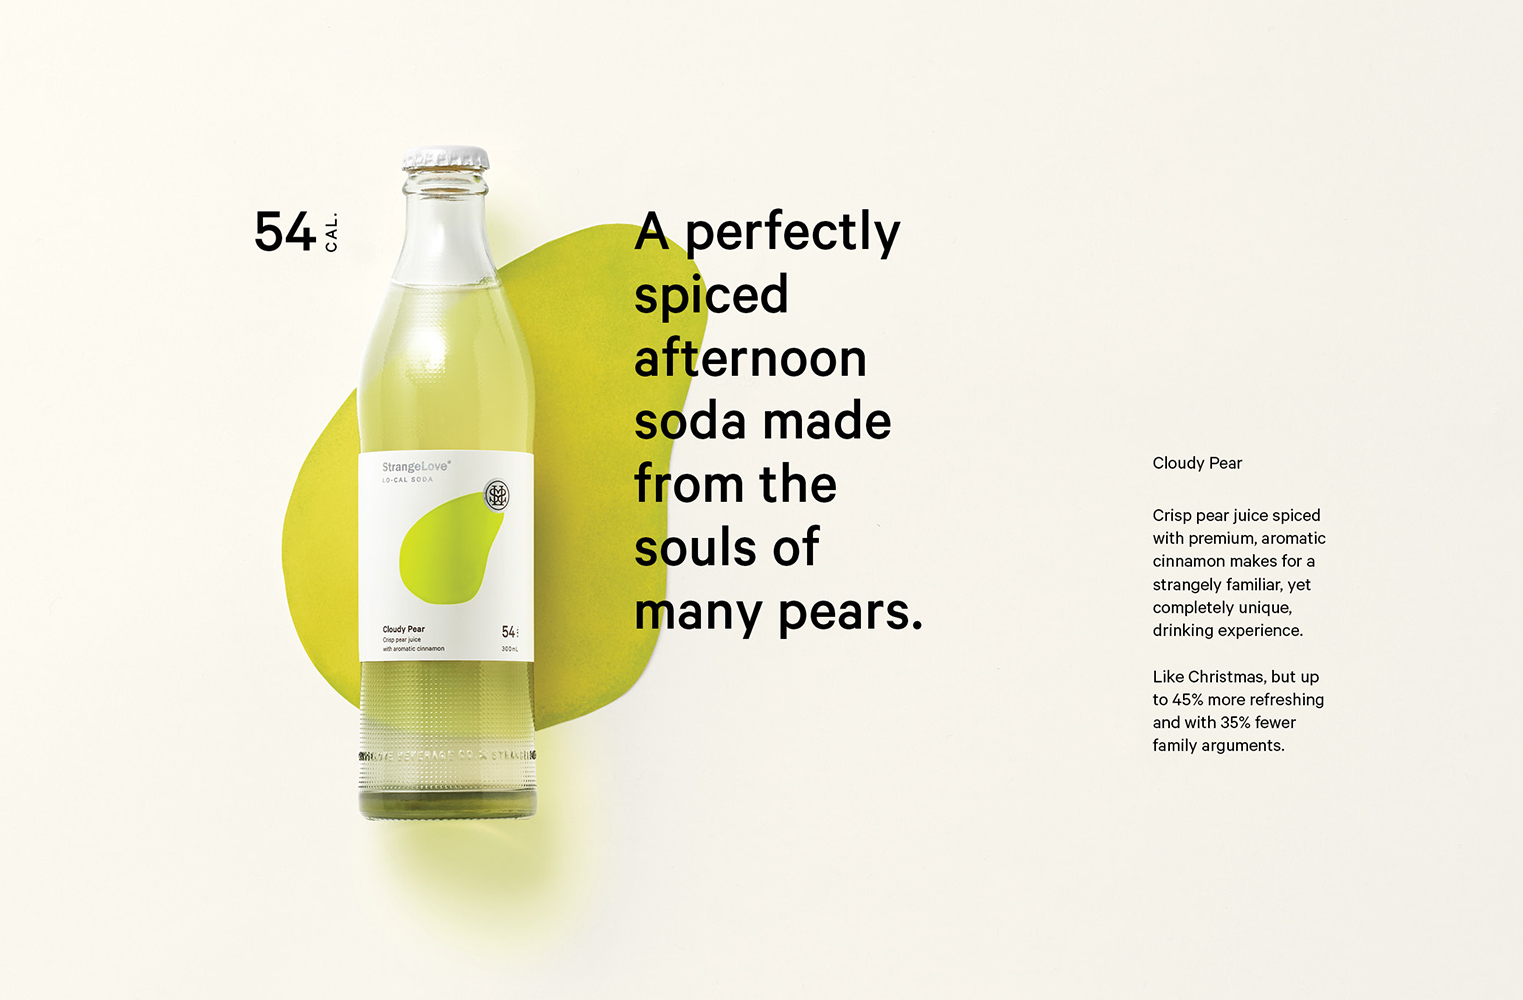 Graphic and structural design created by New Zealand studio Marx Design for soft drinks brand StrangeLove